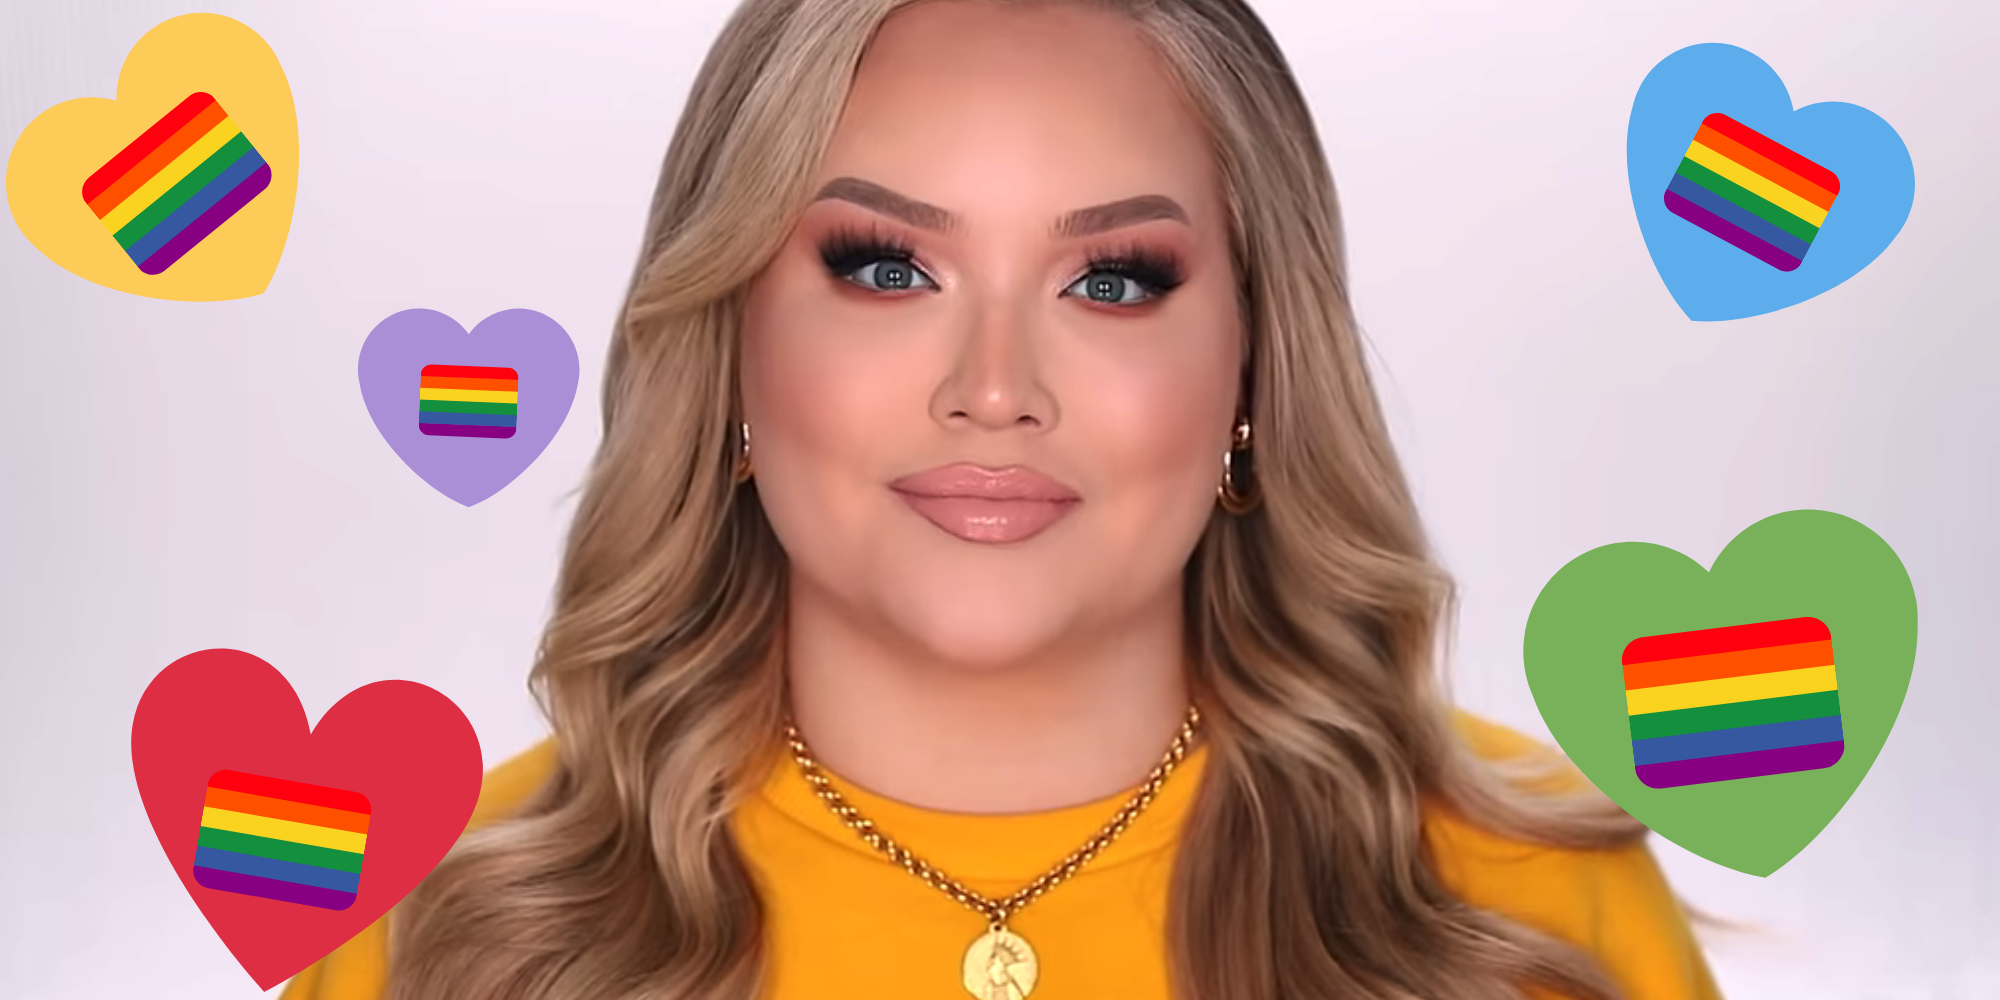 YouTuber NikkieTutorials comes out as trans in new video after being blackmailed | indy100